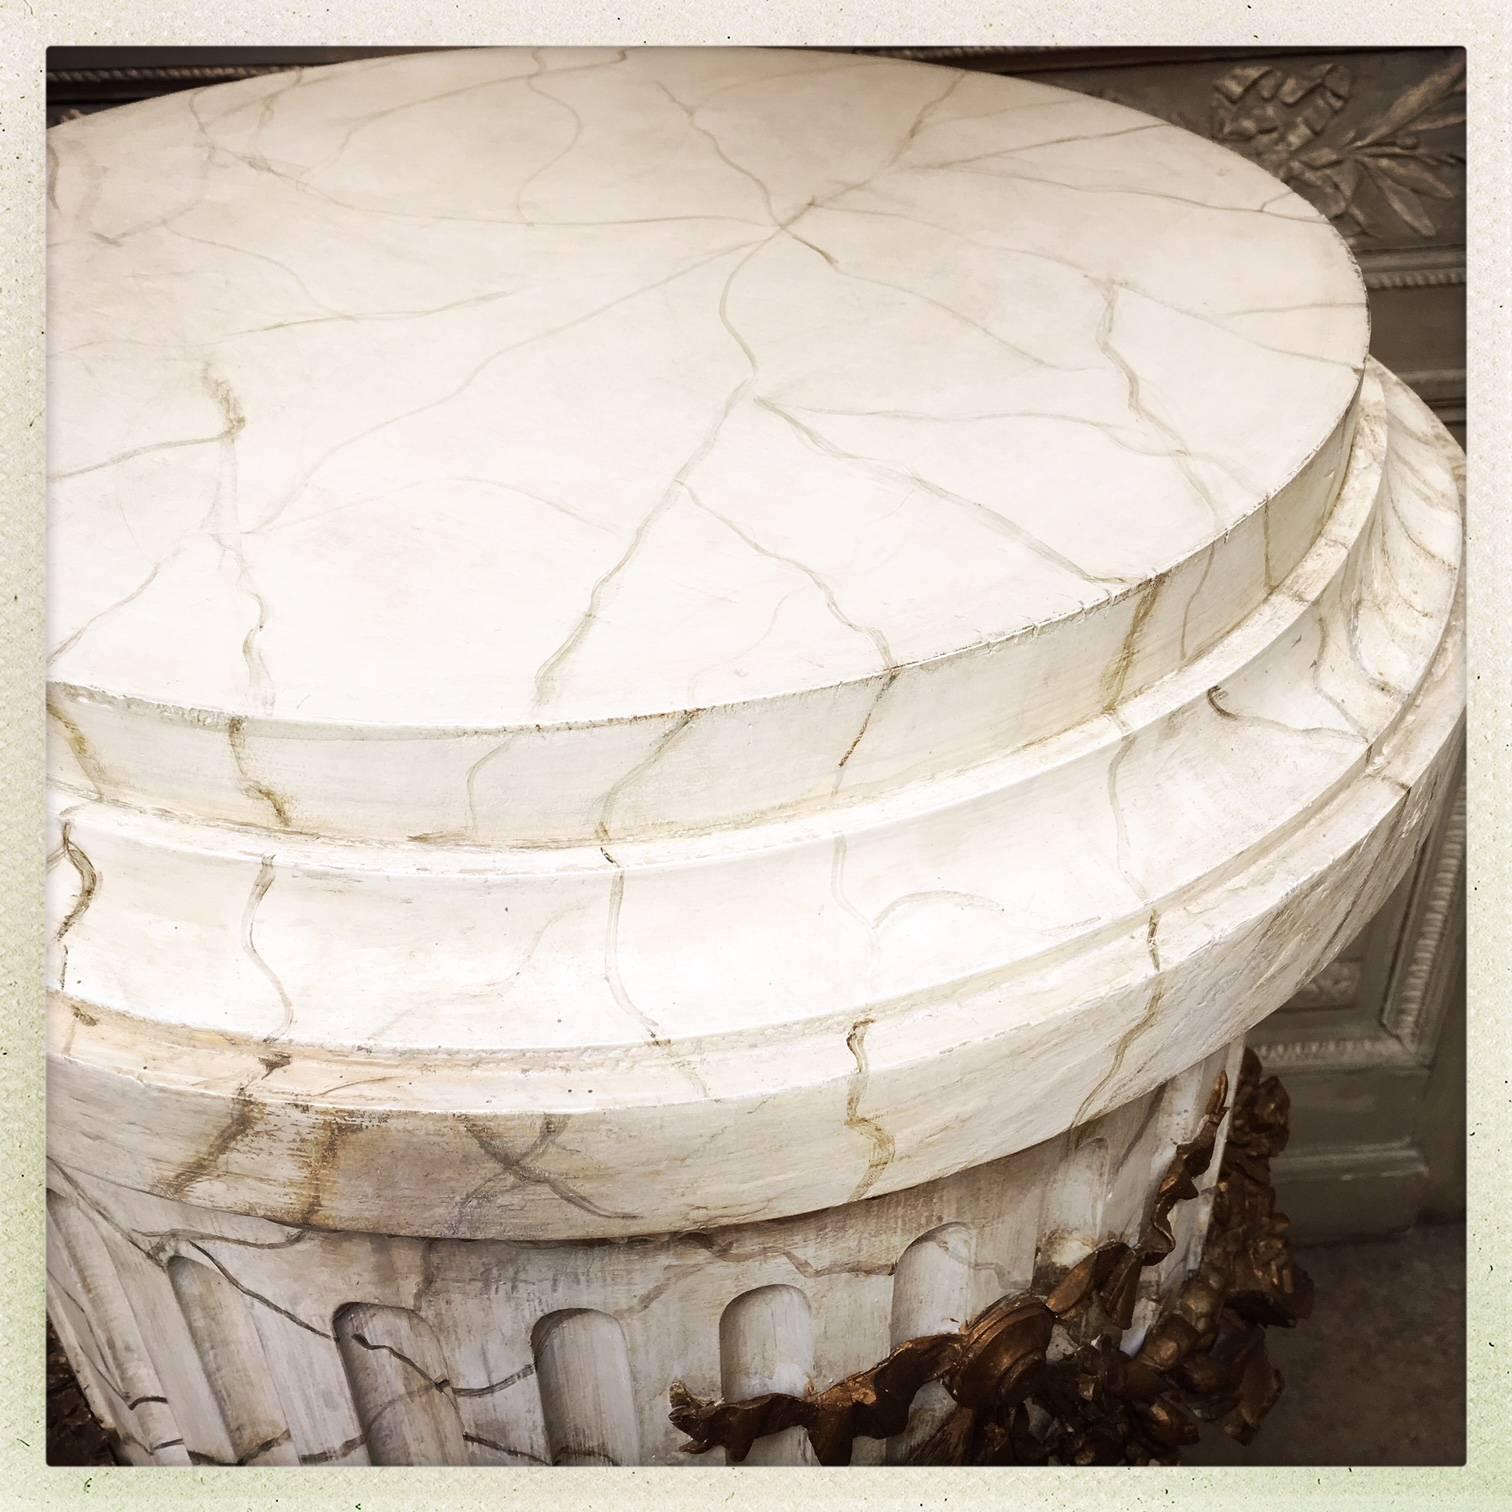 A large French Louis XVI style carved wood pedestal with a faux marble and gilded finish. This is a very decorative piece that can hold a large vessel or bust.